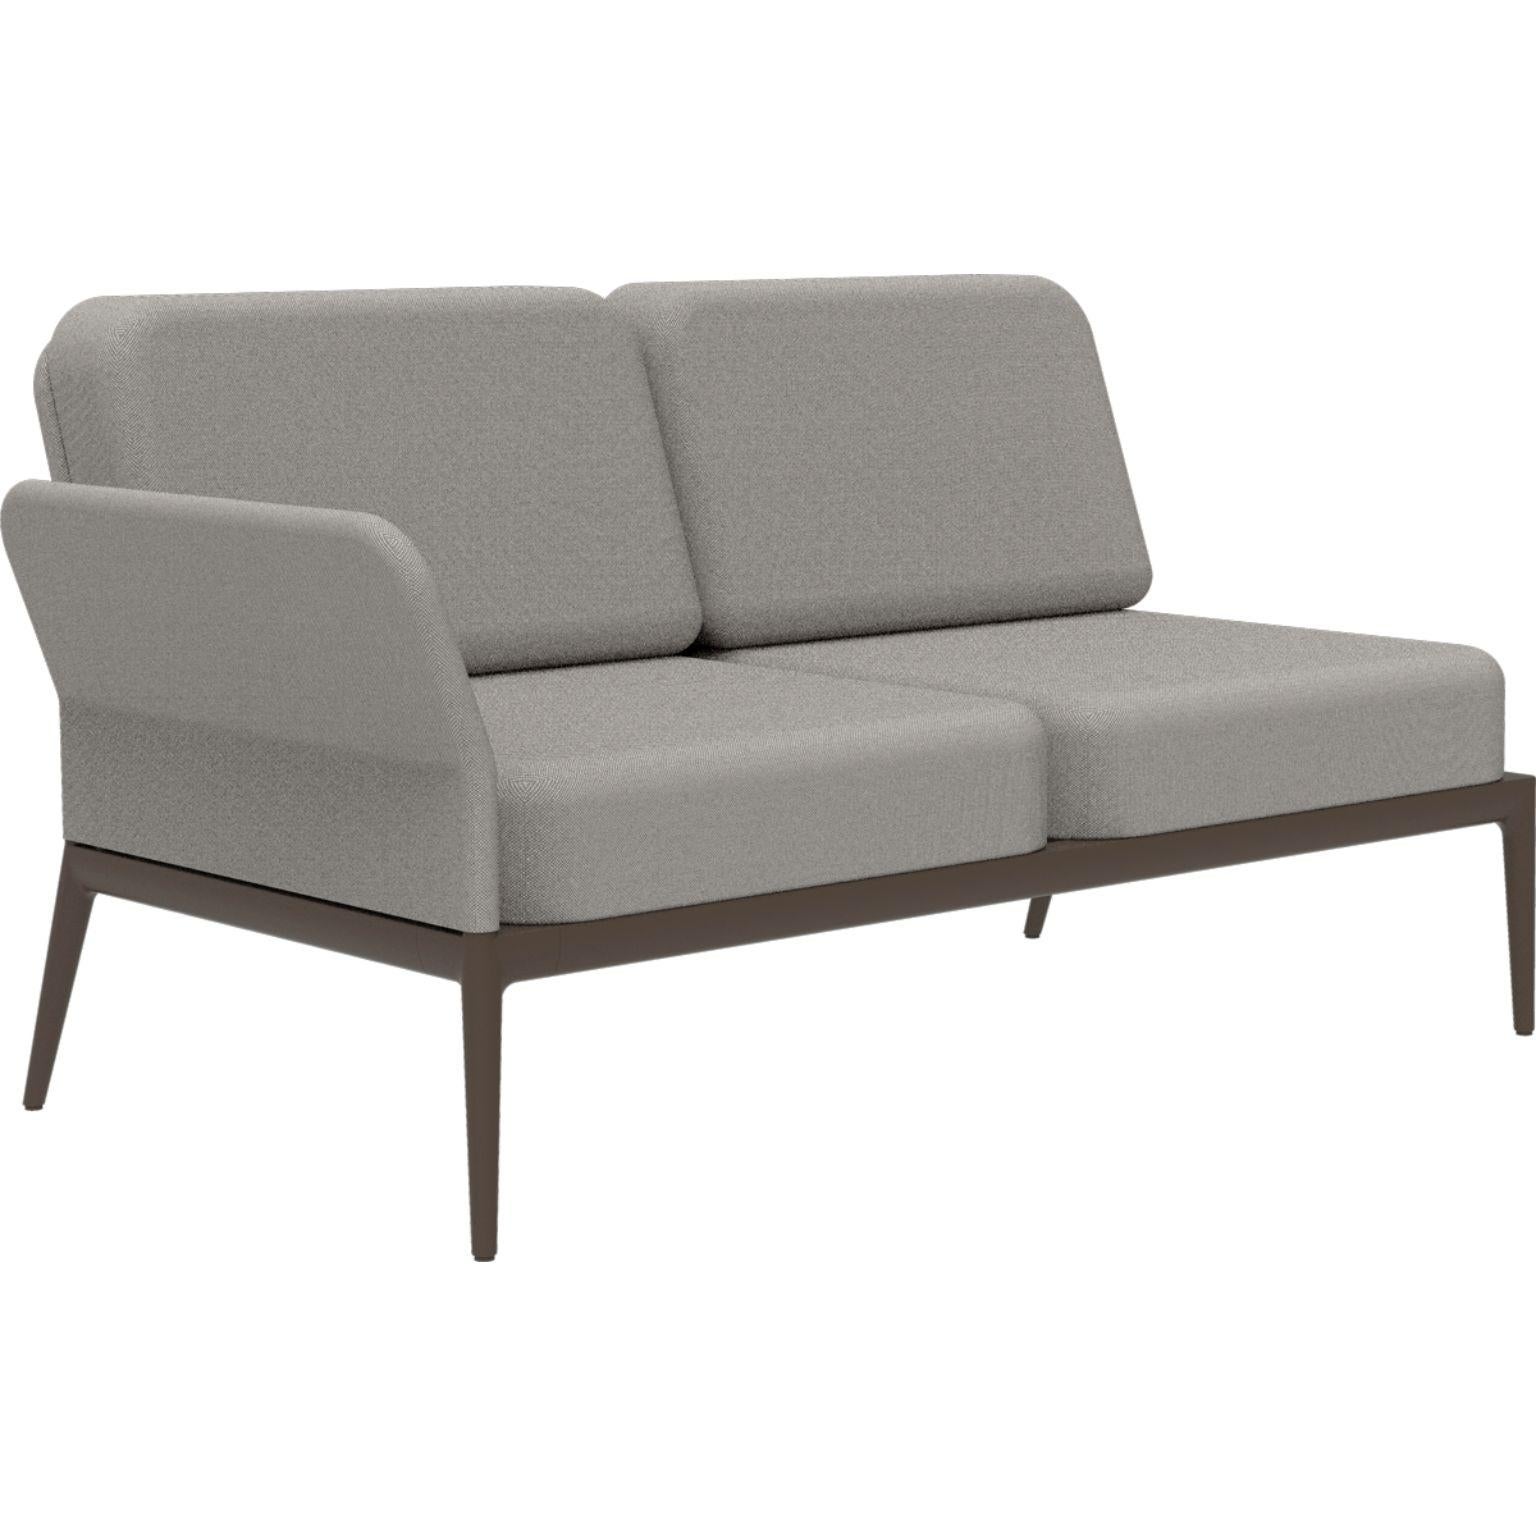 Cover Bronze Double Right Modular Sofa by MOWEE
Dimensions: D83 x W148 x H81 cm (seat height 42 cm).
Material: Aluminum and upholstery.
Weight: 29 kg.
Also available in different colors and finishes. 

An unmistakable collection for its beauty